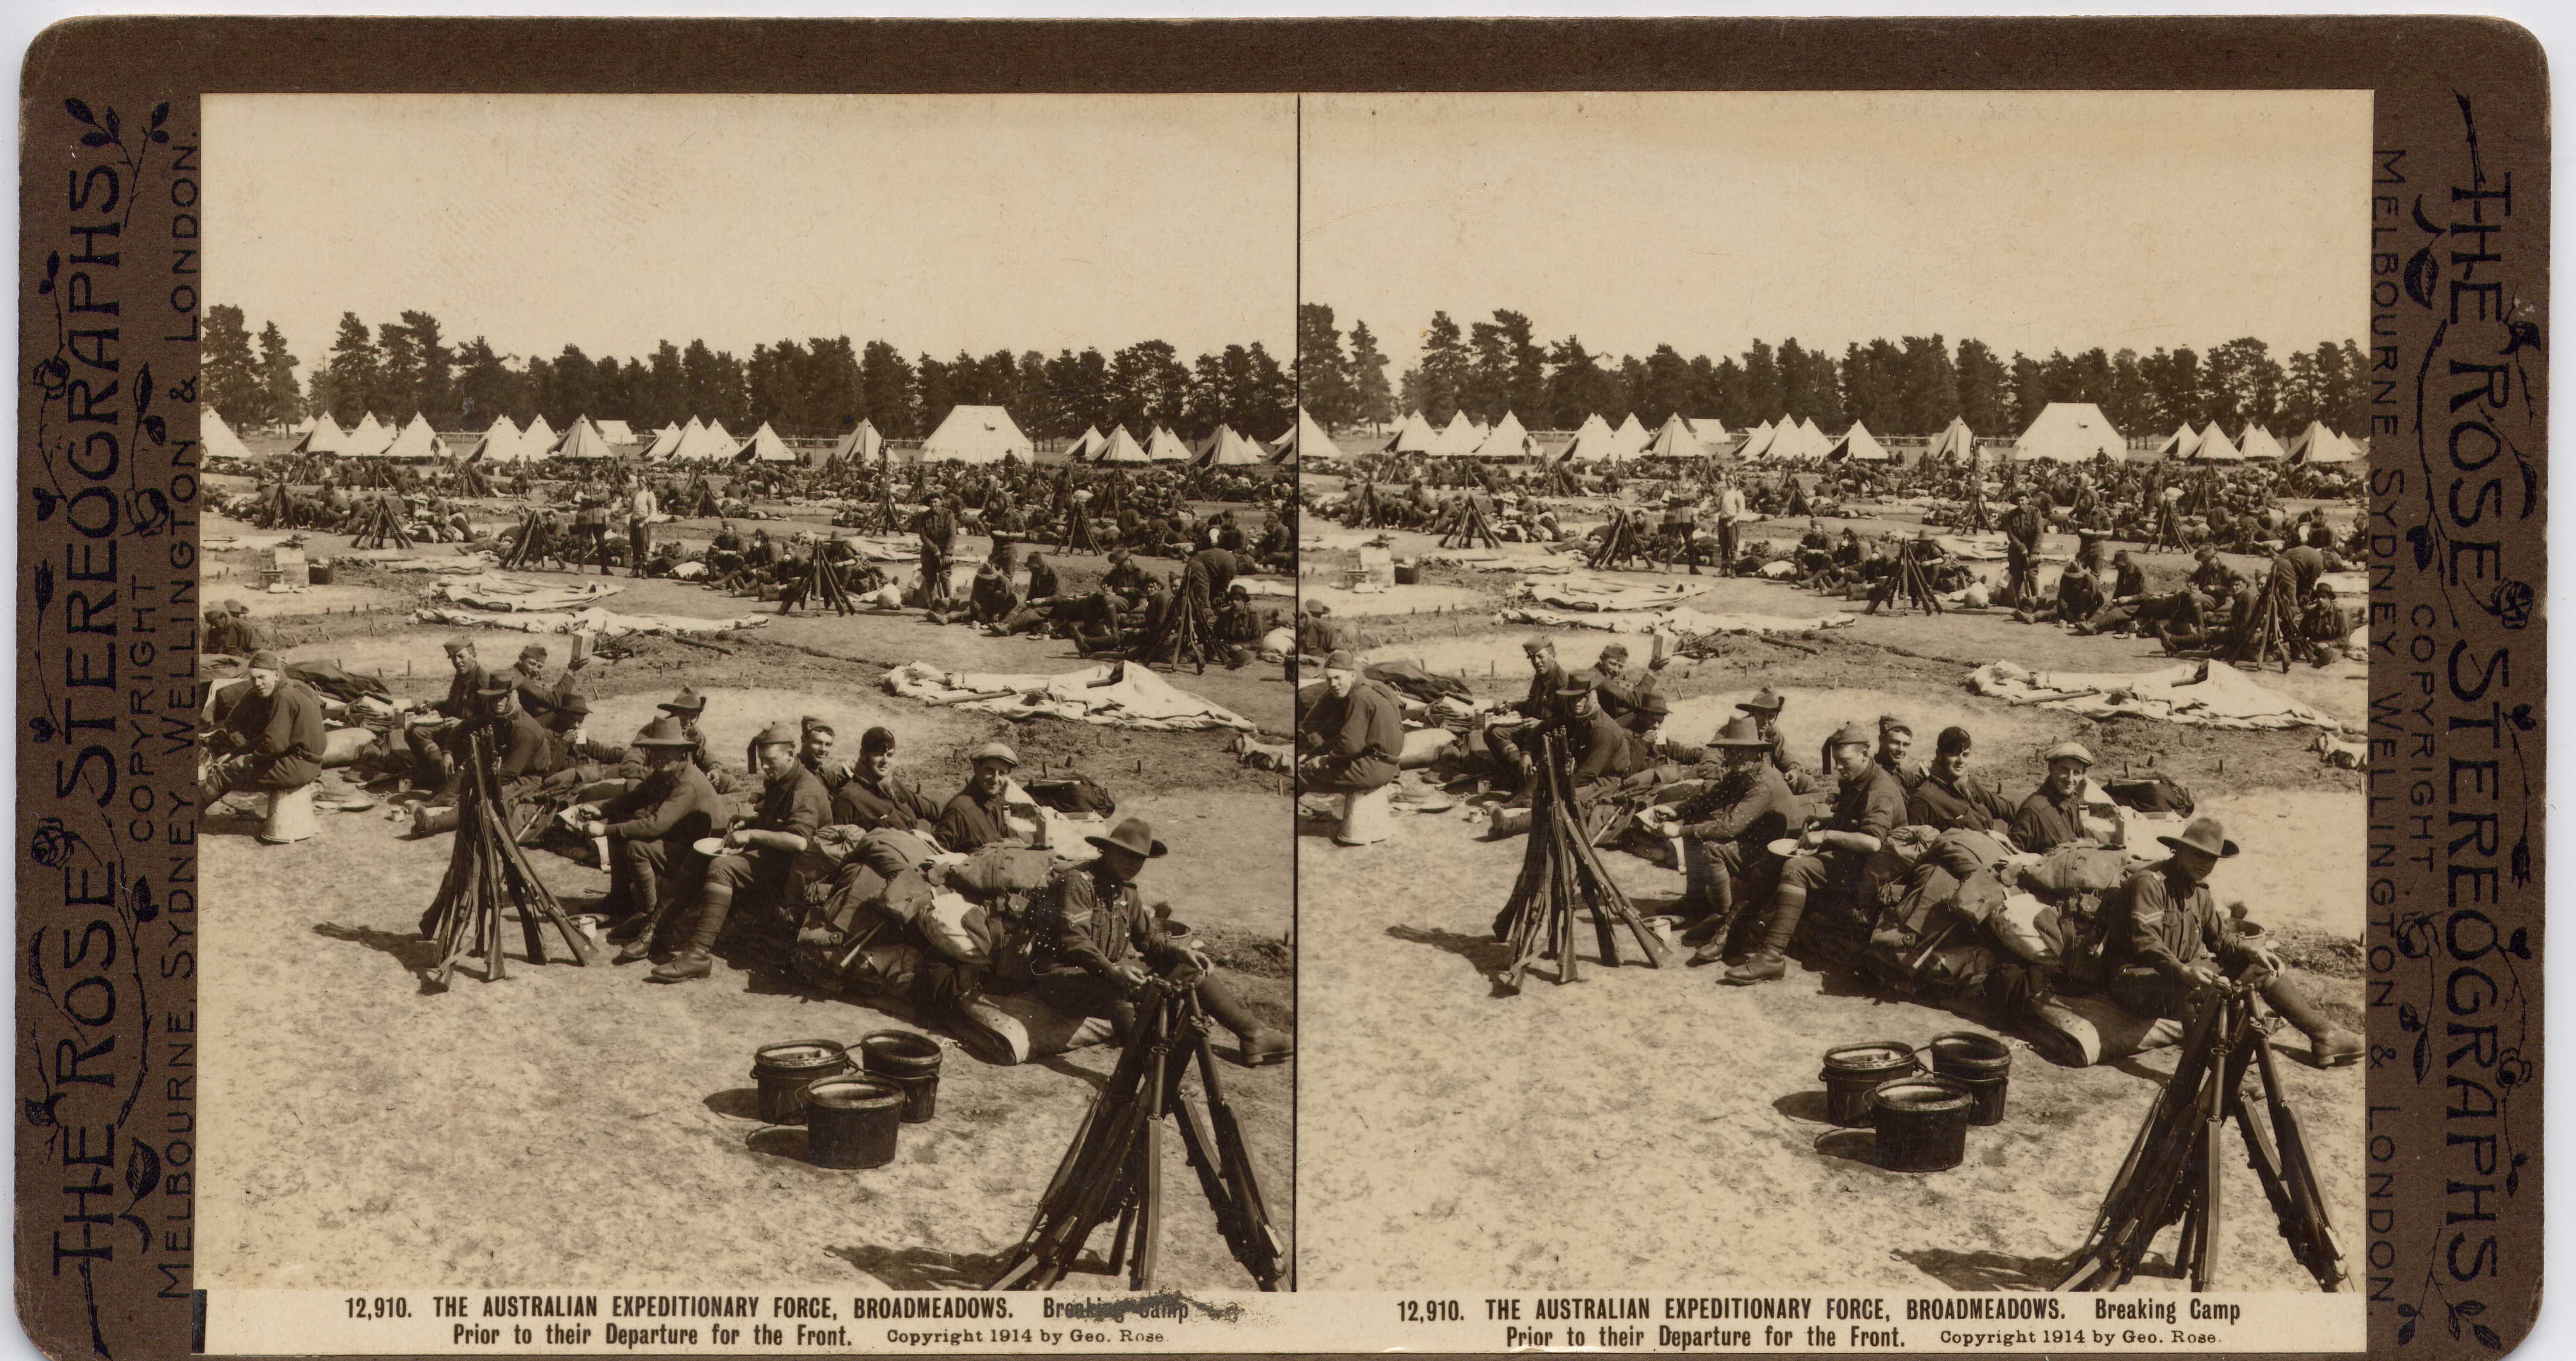 THE AUSTRALIAN EXPEDITIONARY FORCE, Broadmeadows. Breaking Camp in Their Departure for the Front.